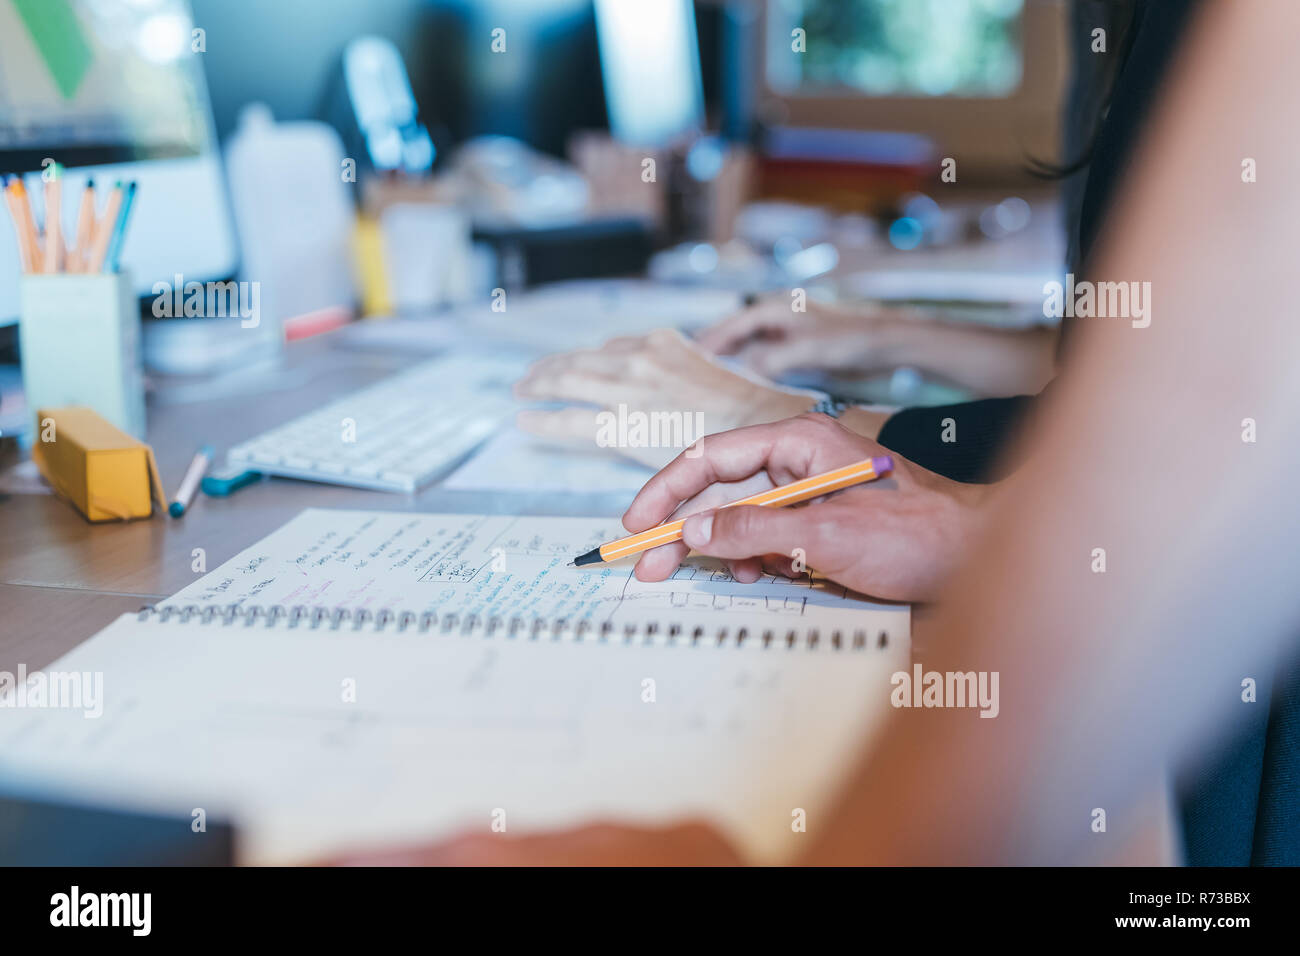 Papers and notes on busy desktop Stock Photo